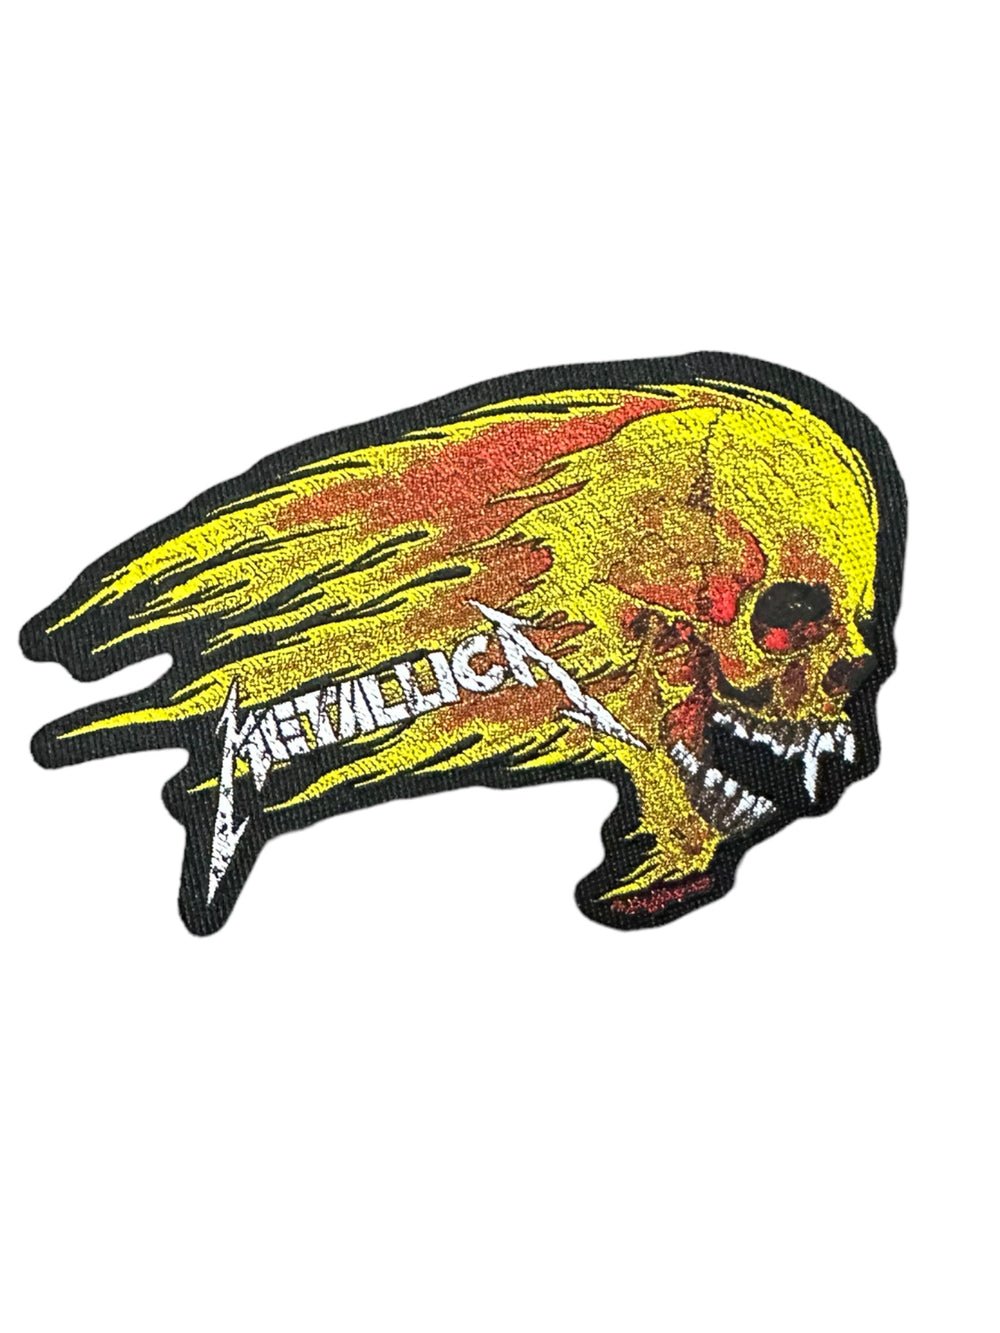 Metallica Flaming Skull Cut-Out Official Woven Patch Brand New